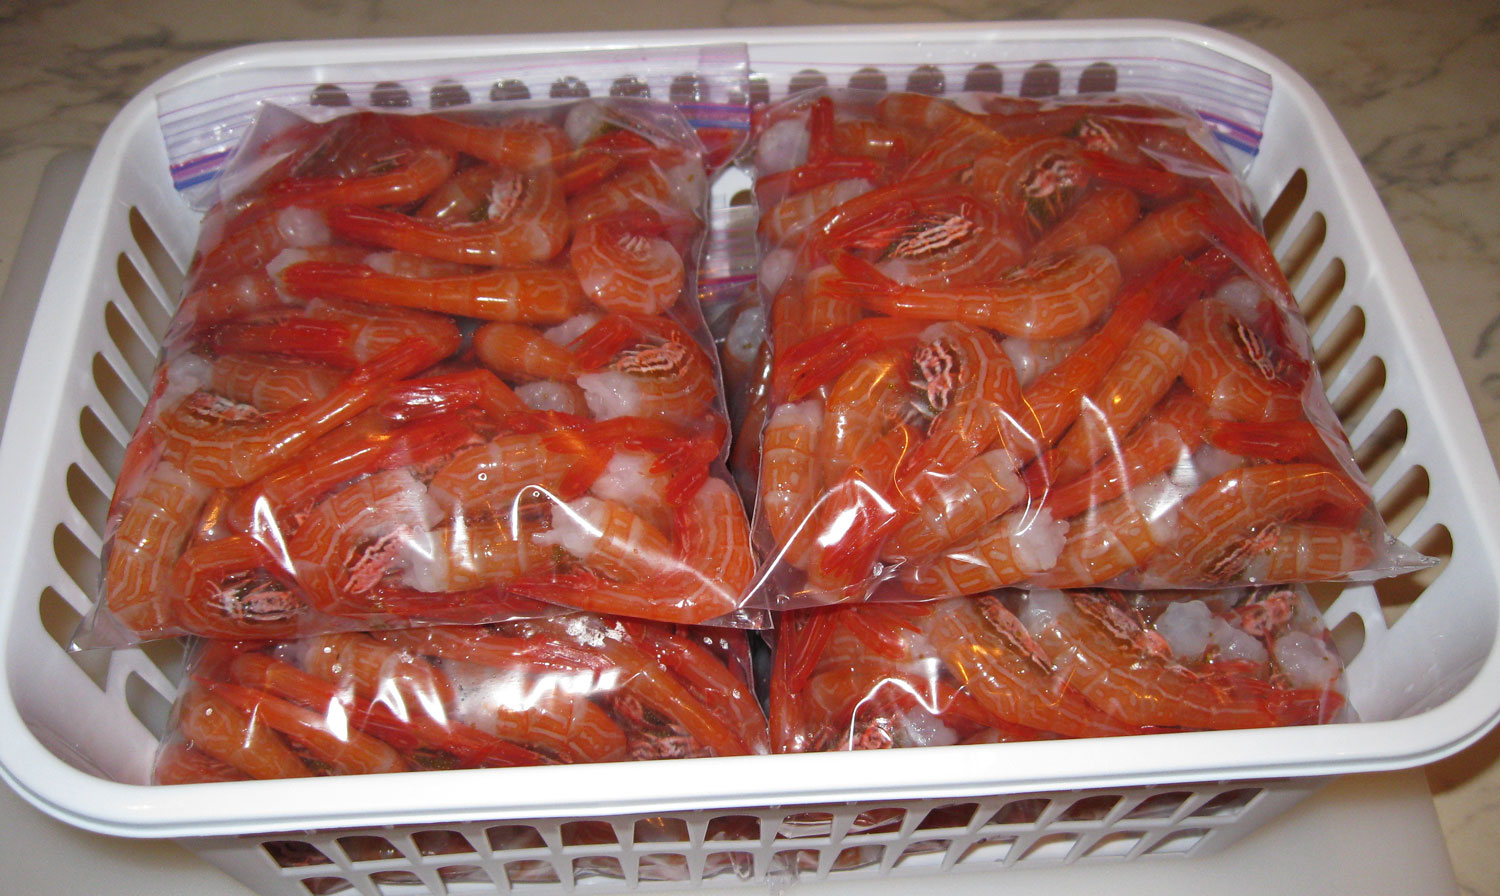 Bags of sidestripe shrimp tails ready to go into the freezer.